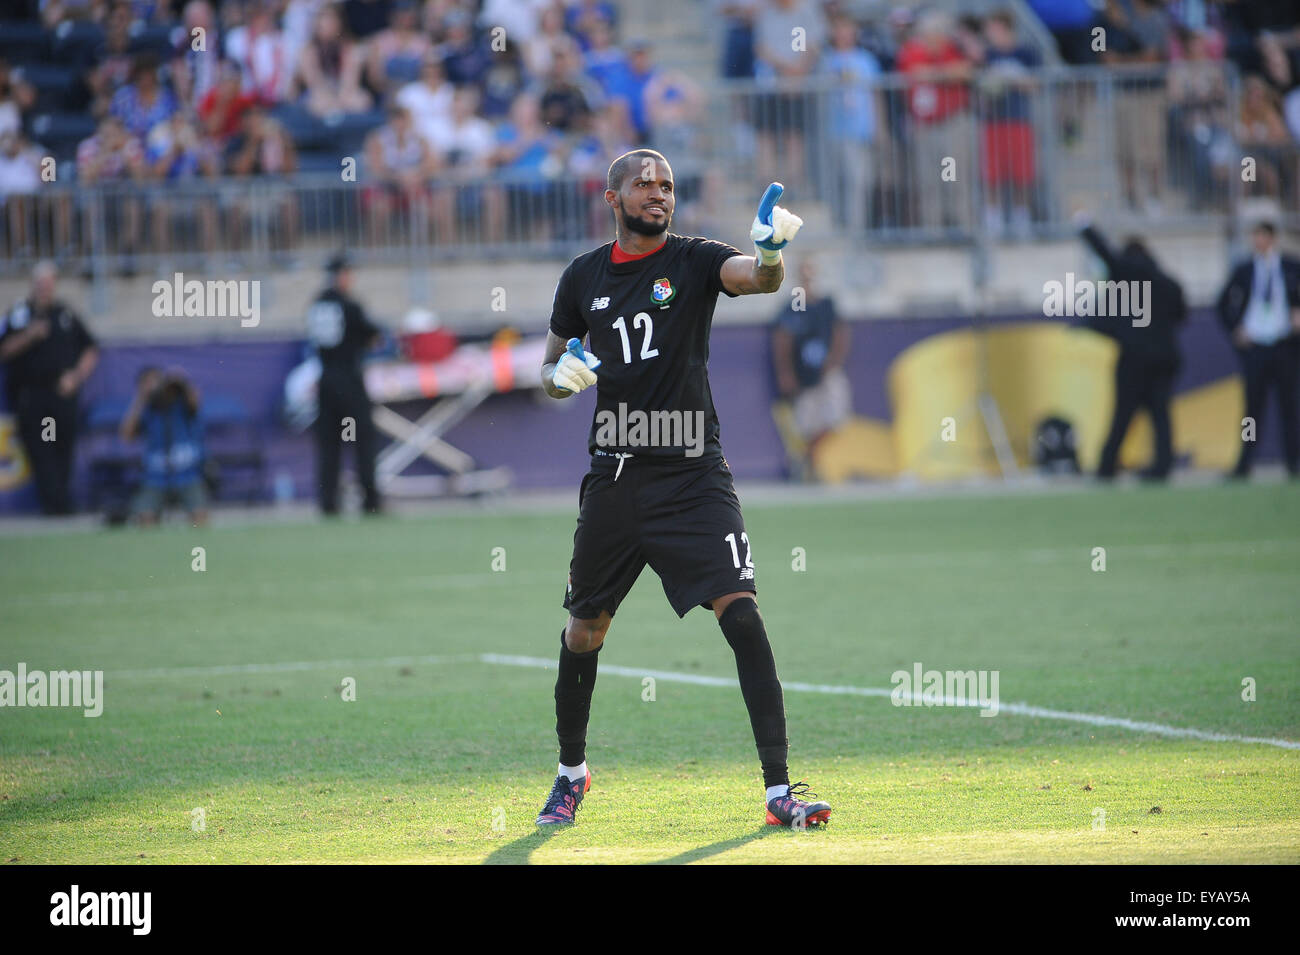 Chester, Pennsylvania, USA. 25th July, 2015. PANAMA goalie, JAIME PENEDO (1) celebrates Panama's win during the third place match which was played at PPL Park in Chester Pa (Credit Image: © Ricky Fitchett via ZUMA Wire) Stock Photo